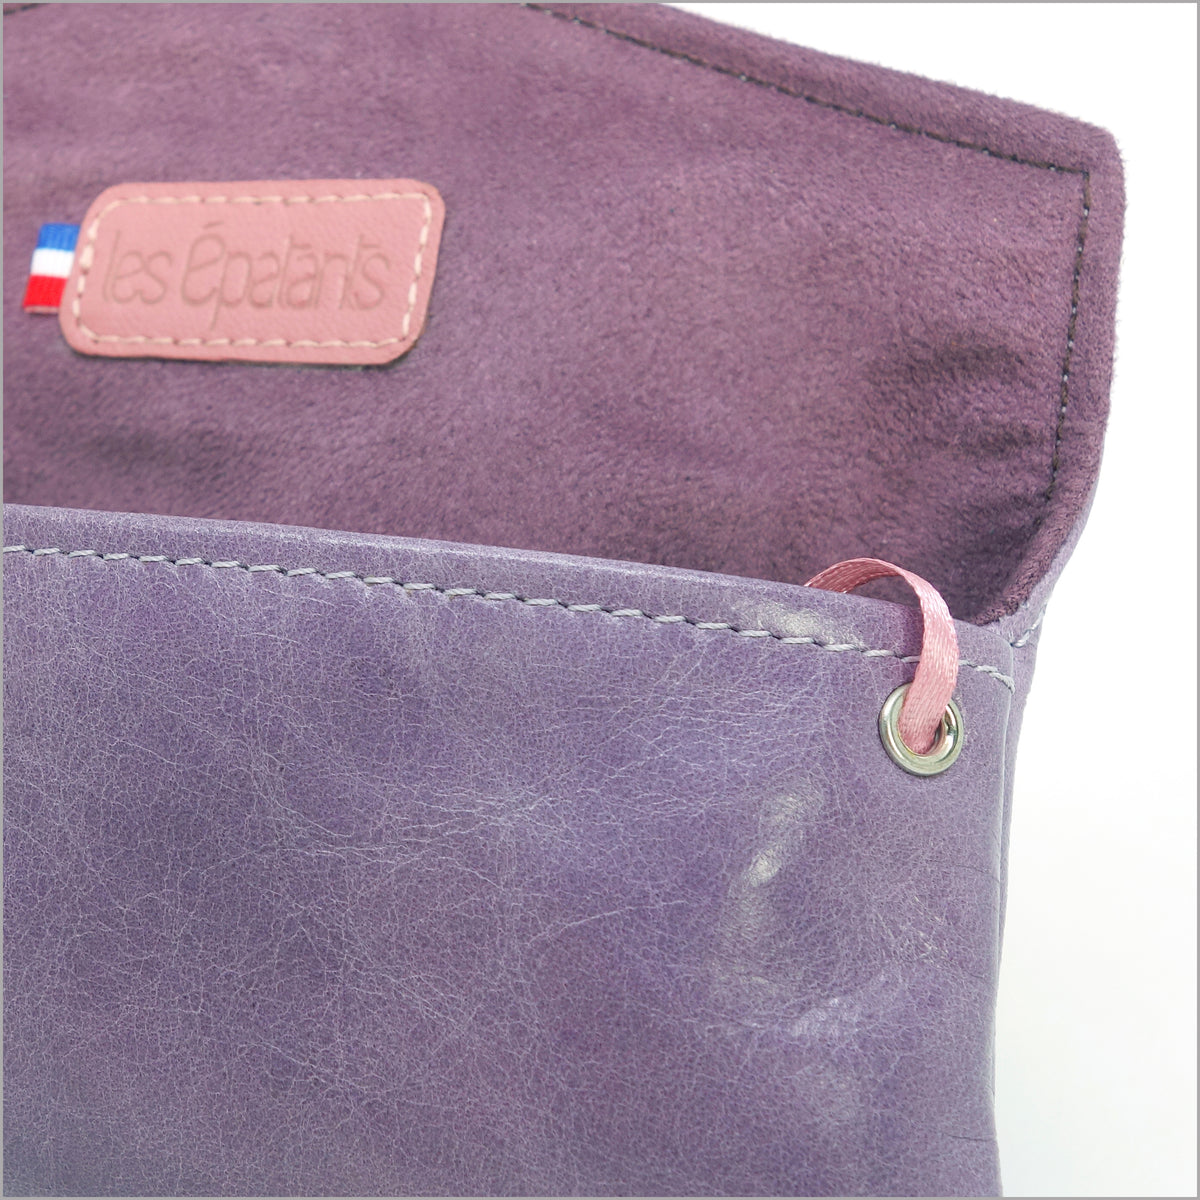 Soft lilac leather glasses case